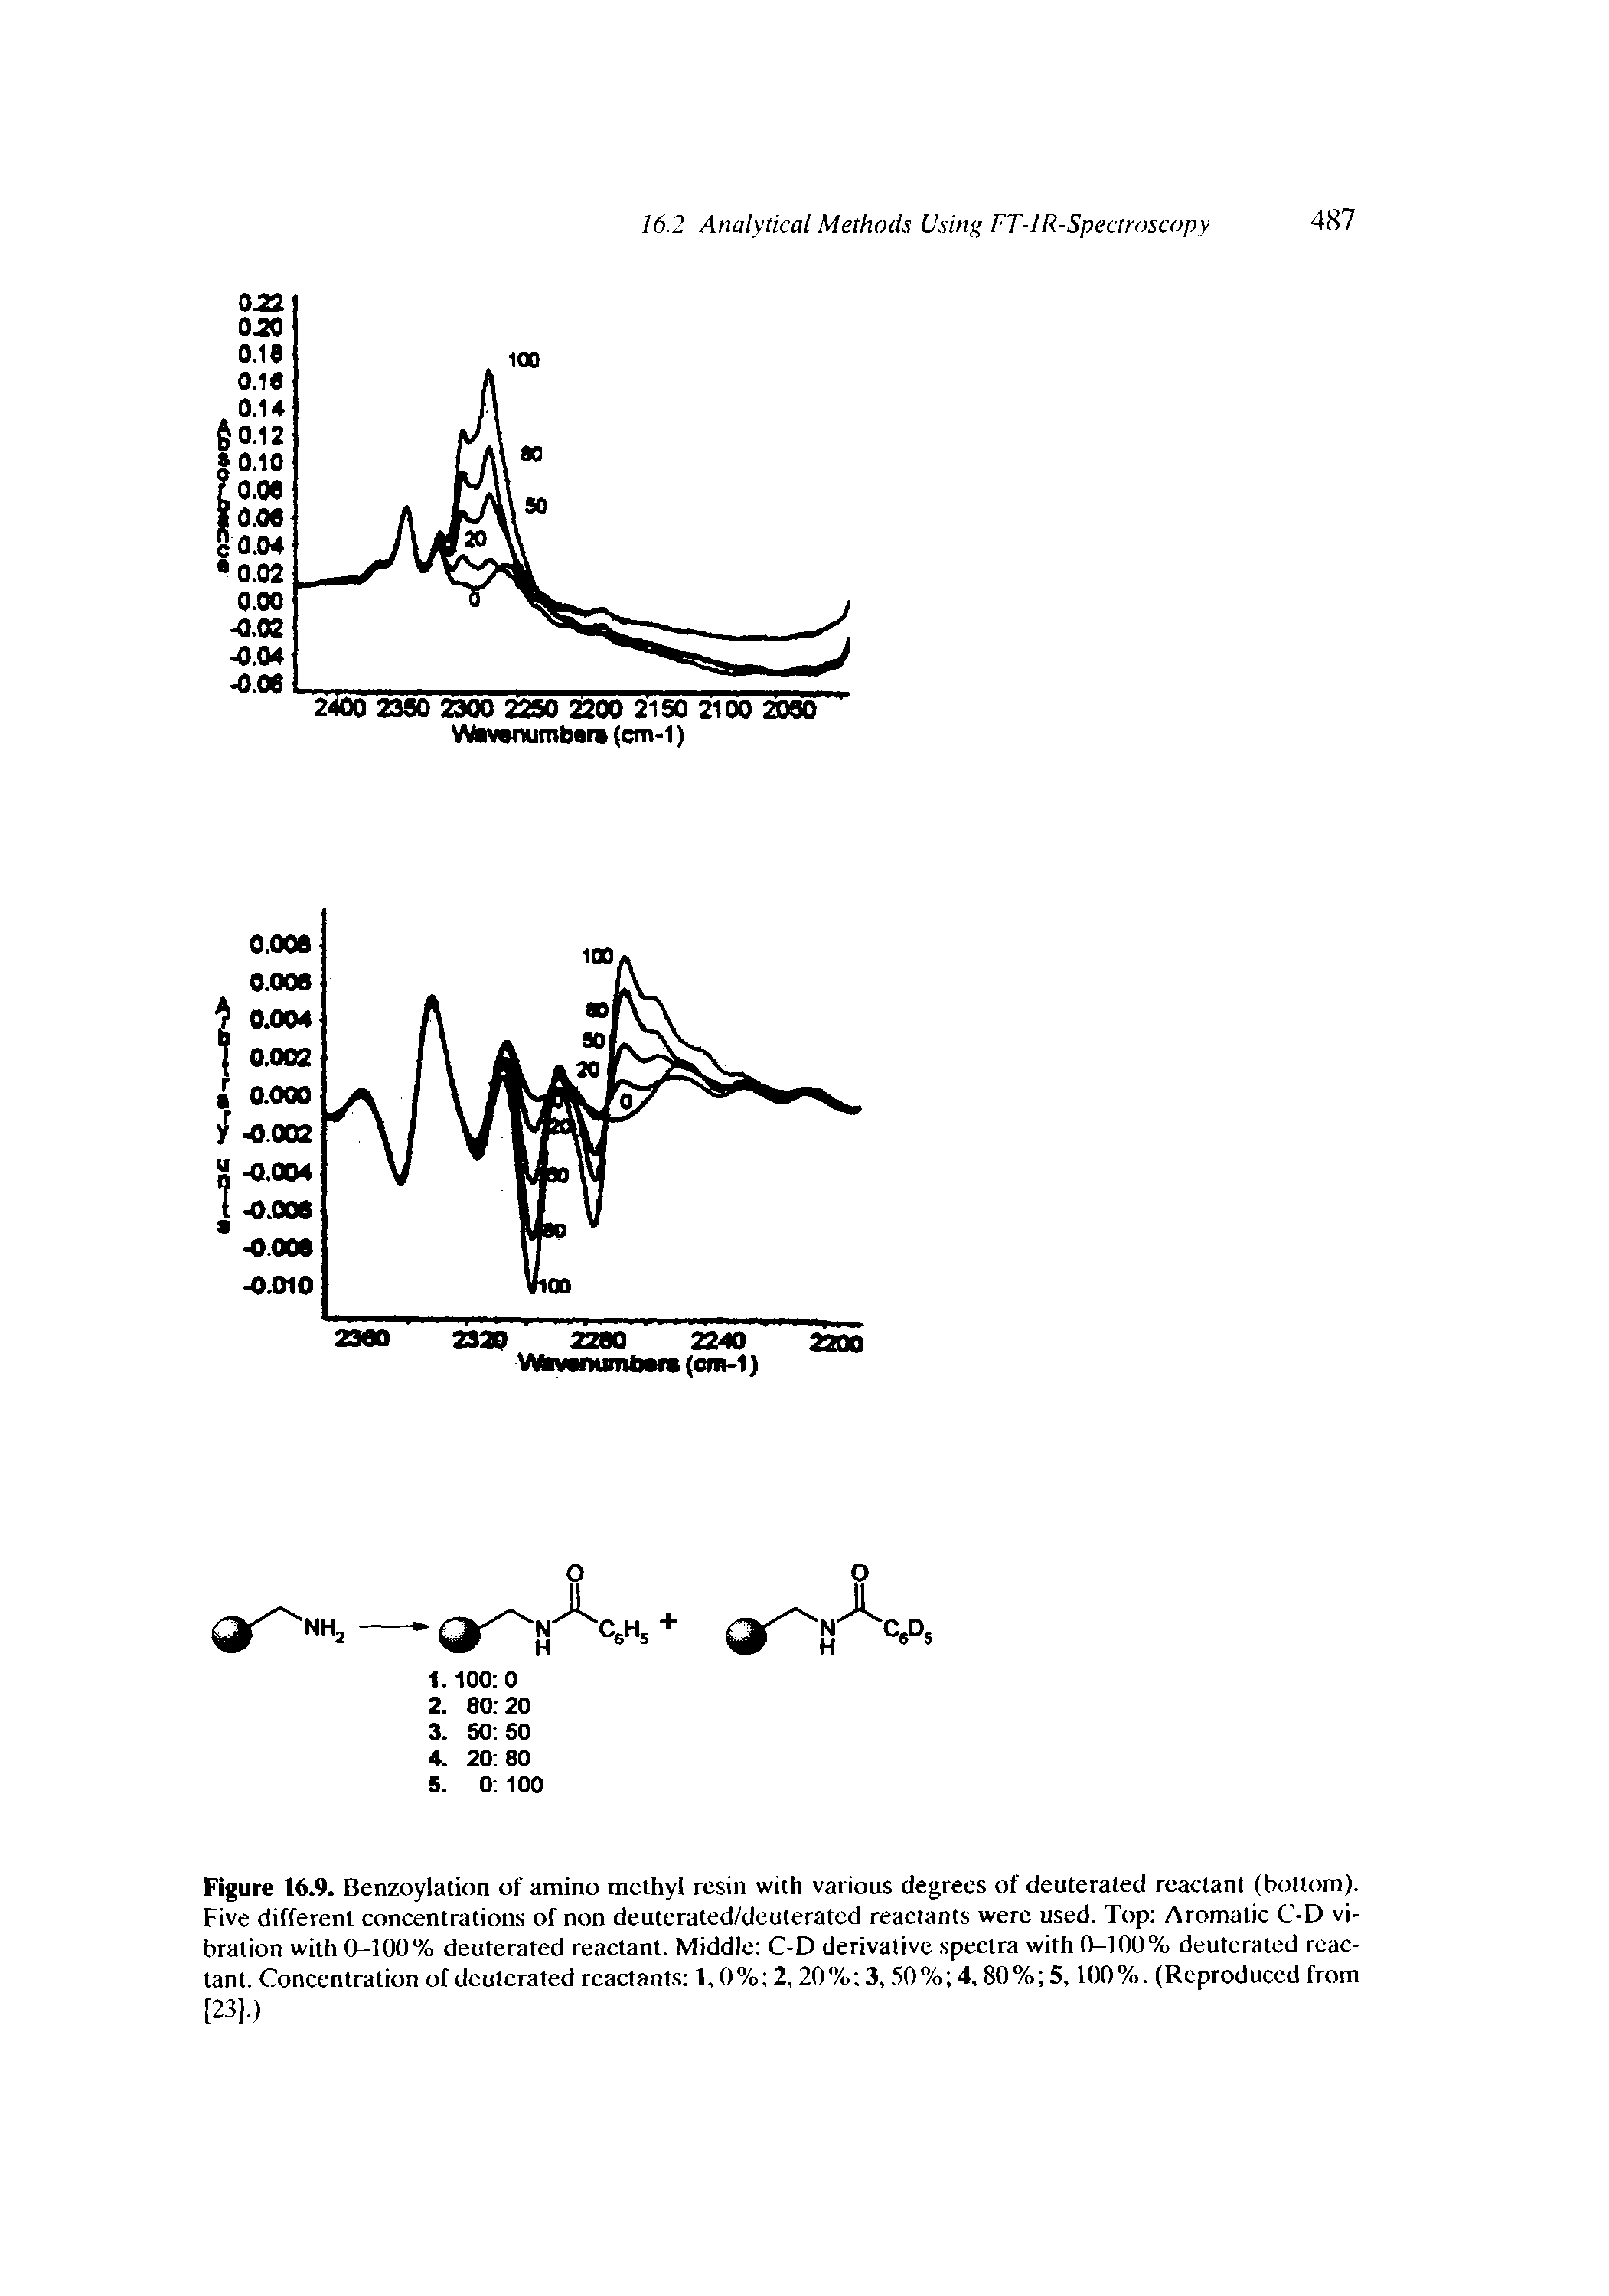 Figure 16.9. Benzoylation of amino methyl resin with various degrees of deuteraled reactant (bottom). Five different concentrations of non deuterated/deuterated reactants were used. Top Aromatic C-D vibration with 0-100% deuterated reactant. Middle C-D derivative spectra with 0-100% deuterated reactant. Concentration of deuterated reactants 1,0% 2,20% 3,50% 4,80% 5,100%. (Reproduced from [23].)...